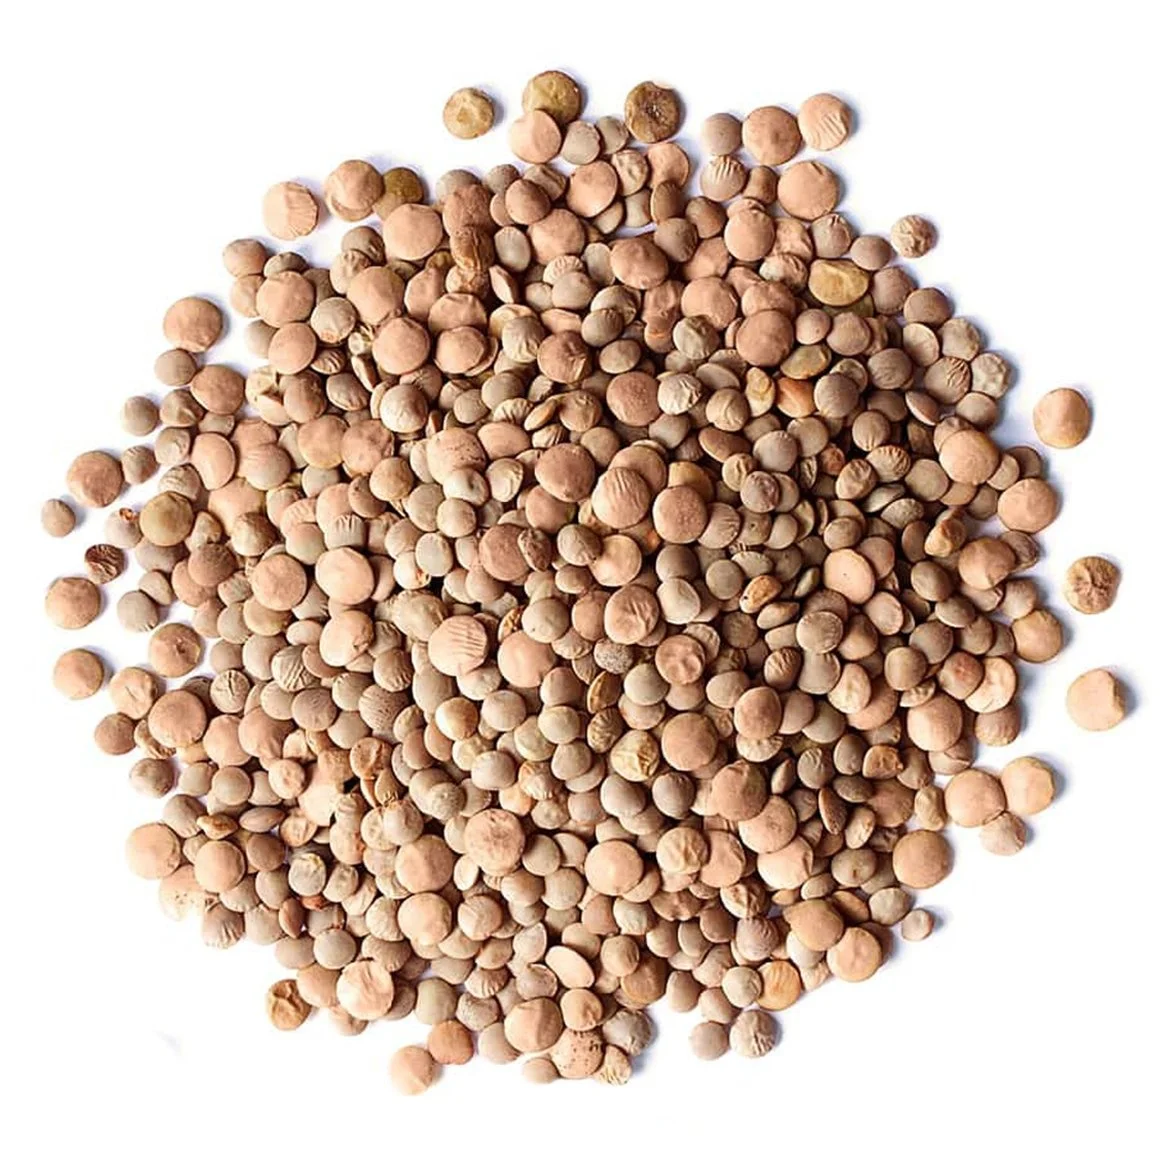 New Crops Red Lentil High Quality Organic Red Lentils in Bulk Max Gift OEM Style